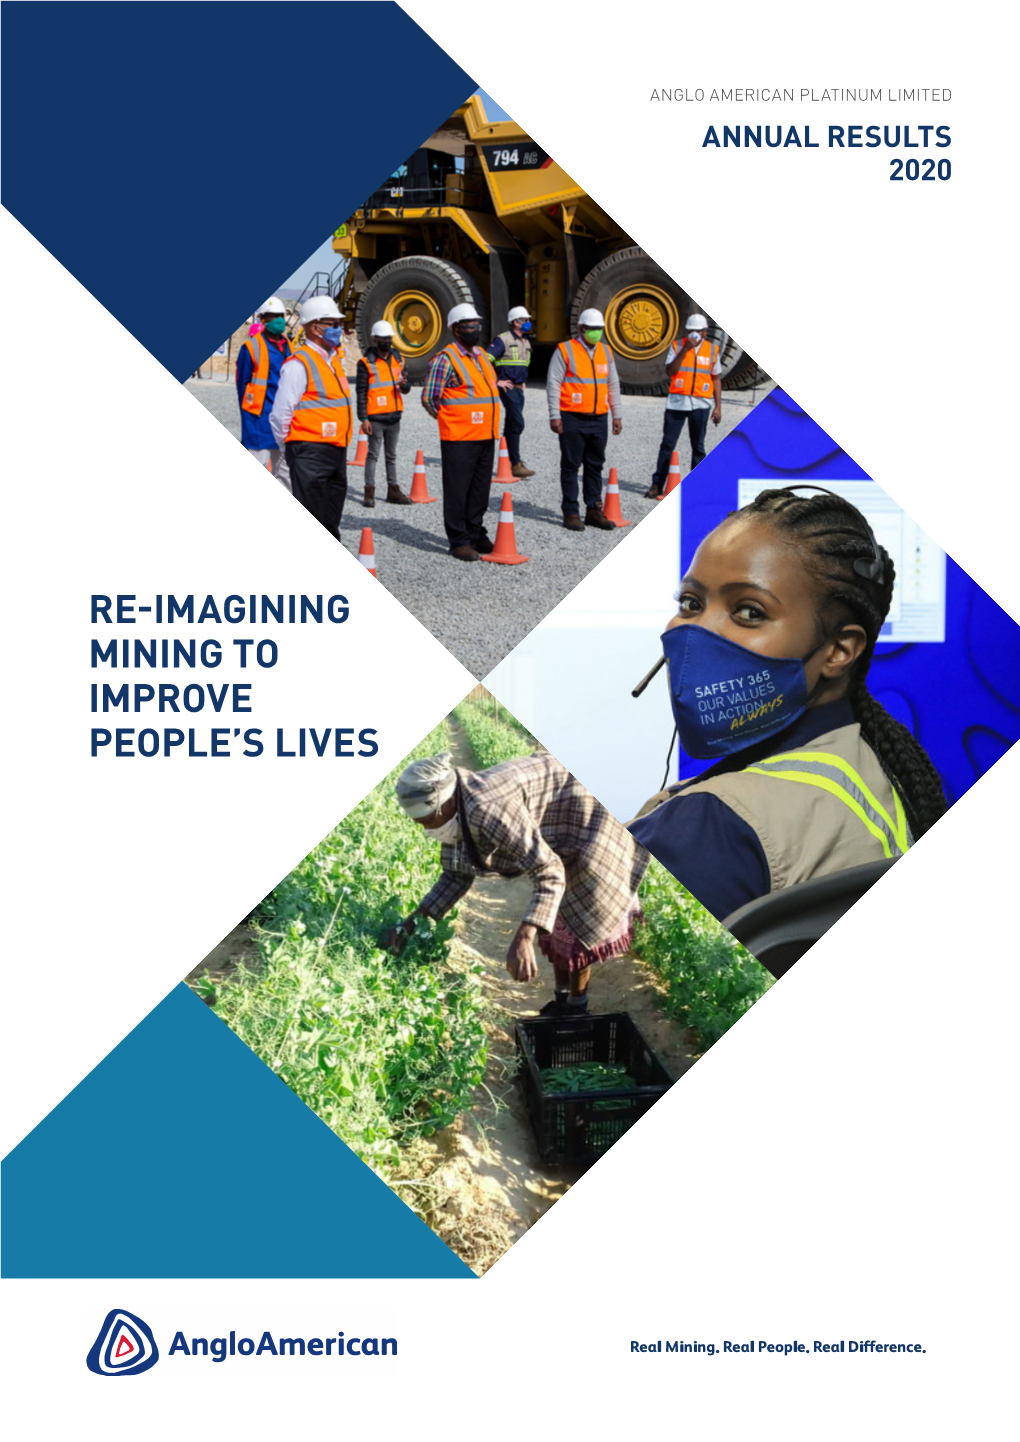 Re-Imagining Mining to Improve People's Lives